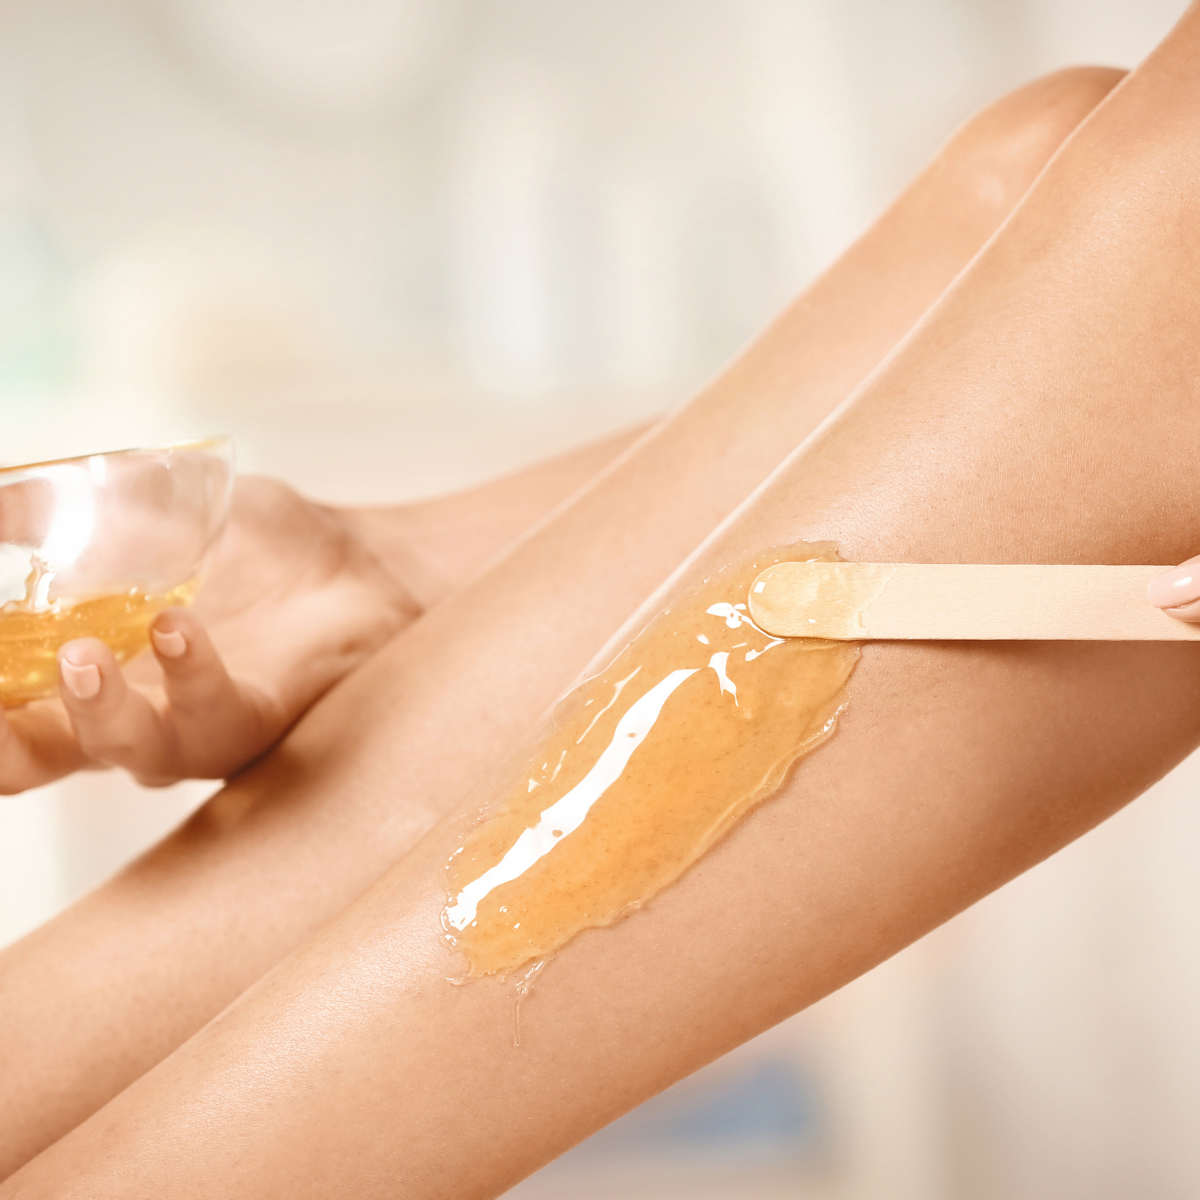 Depil Bella Honey Wax Beads application on leg for smooth skin.